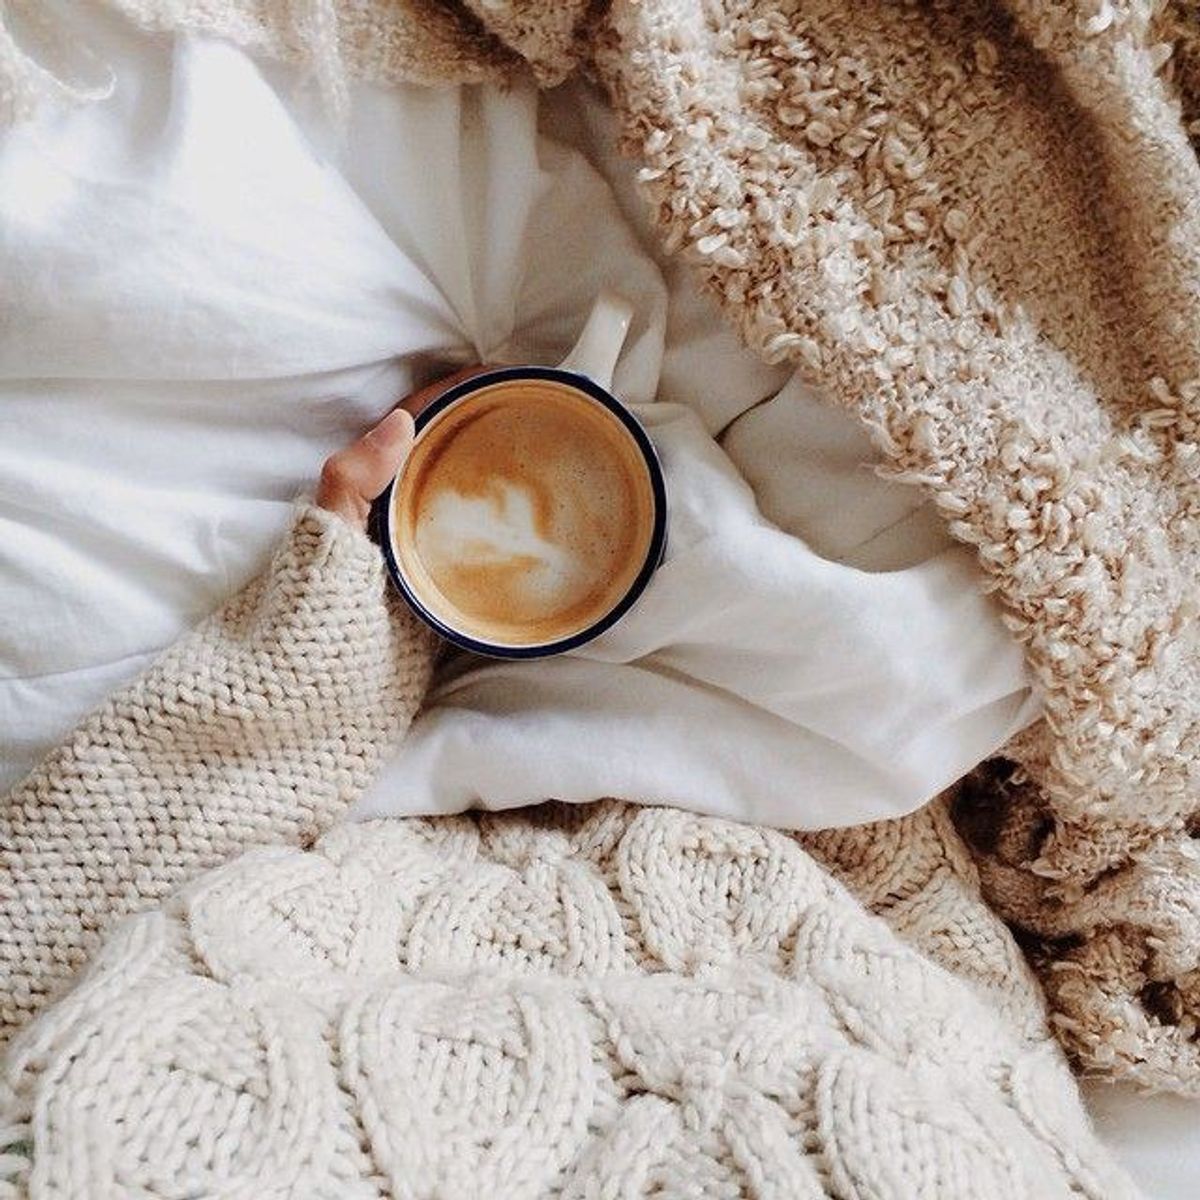 4 Ways to Get Out of Bed in the Winter